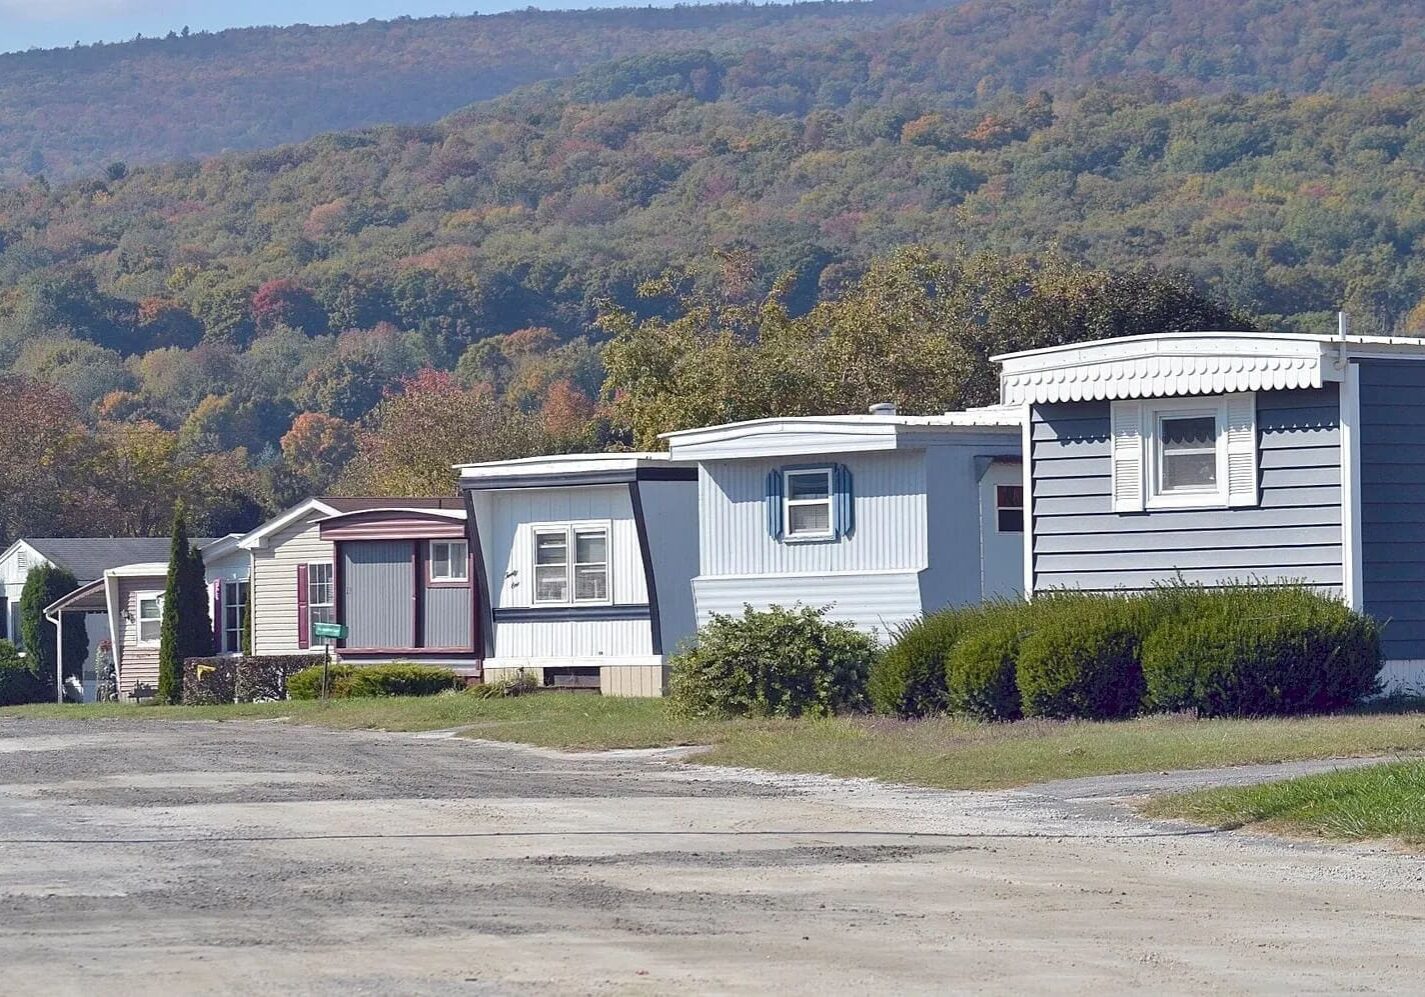 A row of mobile homes in the middle of nowhere.